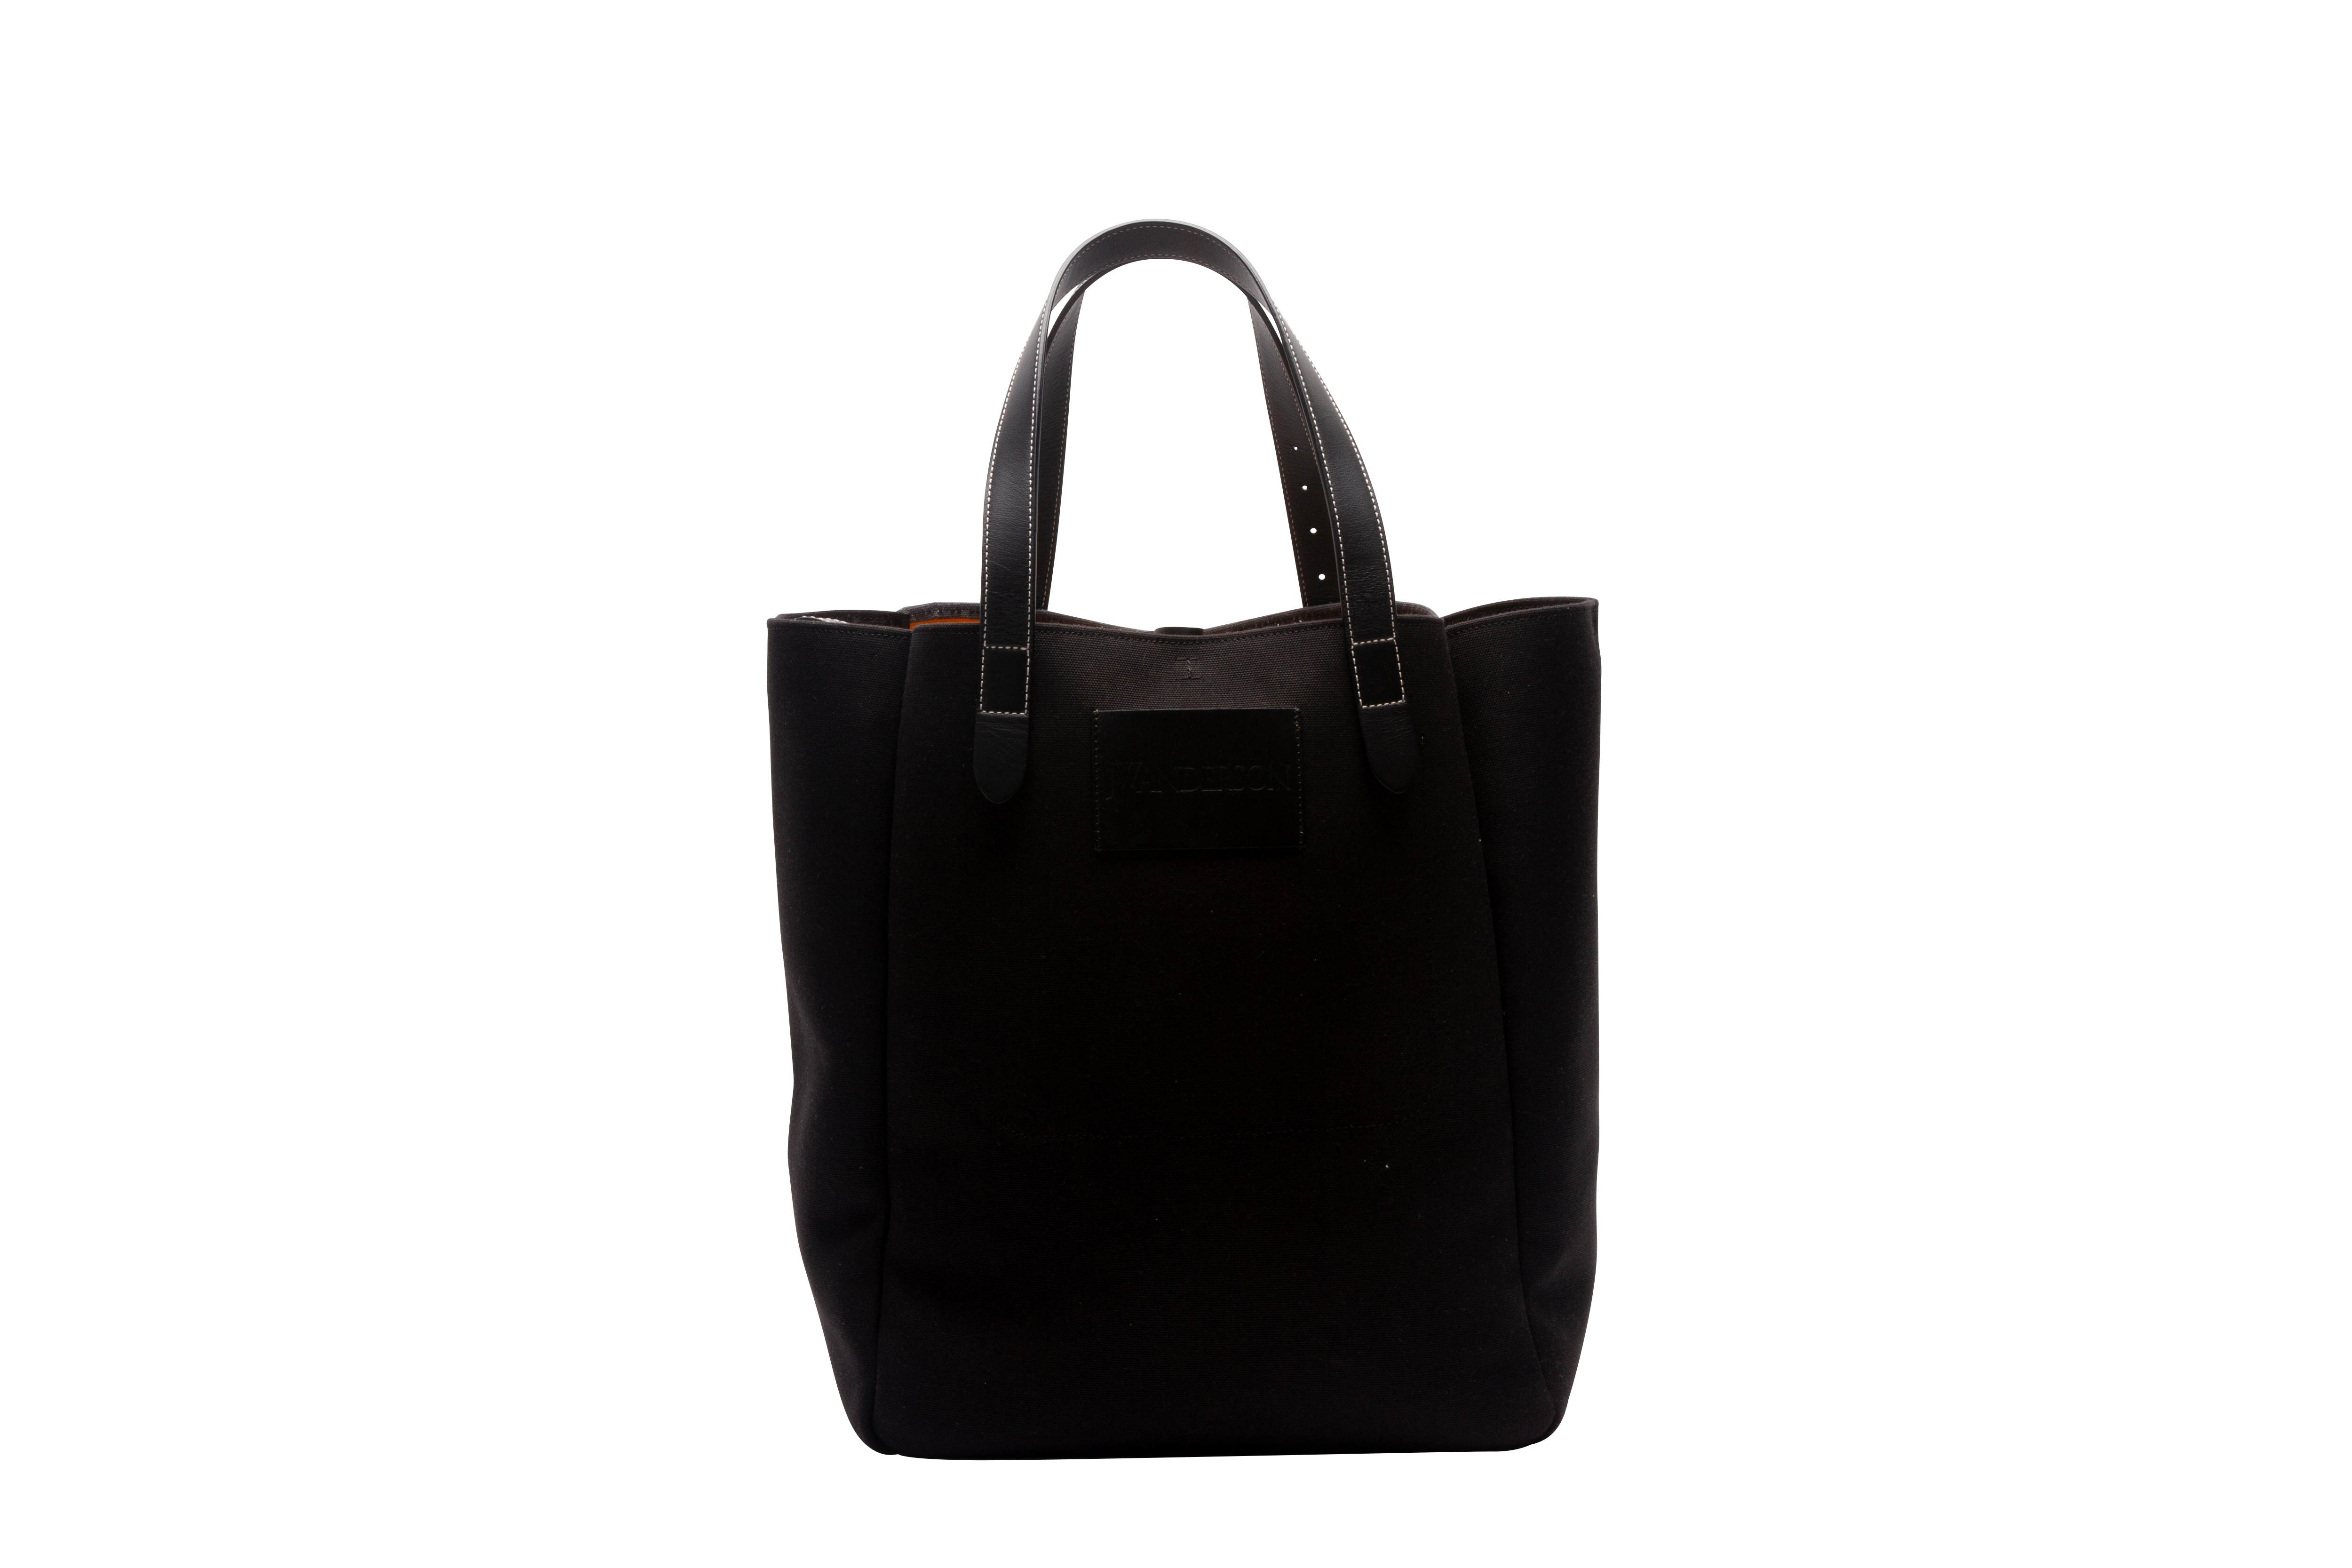 A JW ANDERSON RUGBY TOTE BAG - Image 3 of 6